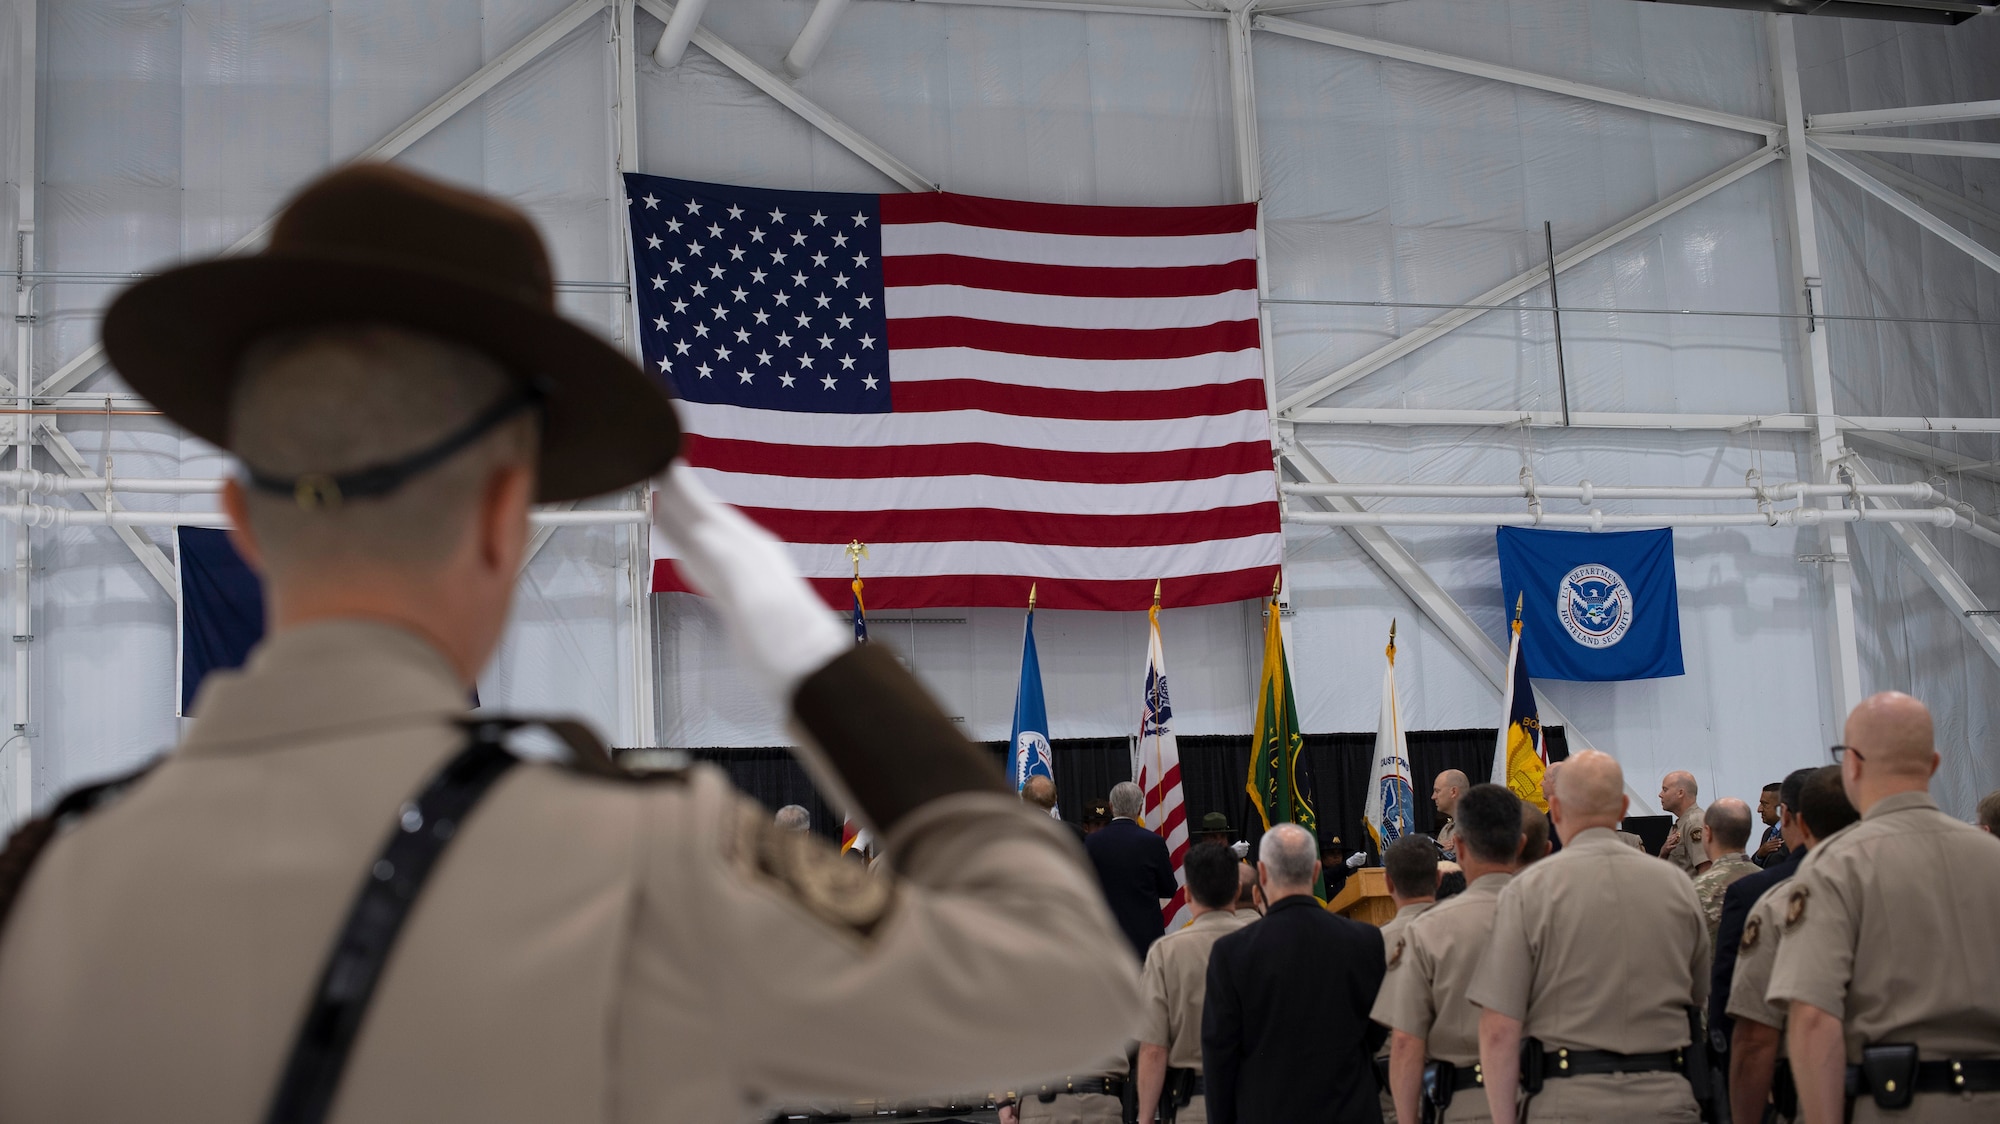 A U.S. Customs and Border Protection agent salutes the flag as the National Anthem is performed during a ceremony August 28, 2019, on Grand Forks Air Force Base, North Dakota. The ceremony was followed by a ribbon-cutting event to officiate the opening of a newly-renovated facility, which will house manned and unmanned CBP aircraft assigned to the National Air and Security Operations Center, Grand Forks. (U.S. Air Force photo by Senior Airman Elora J. Martinez)